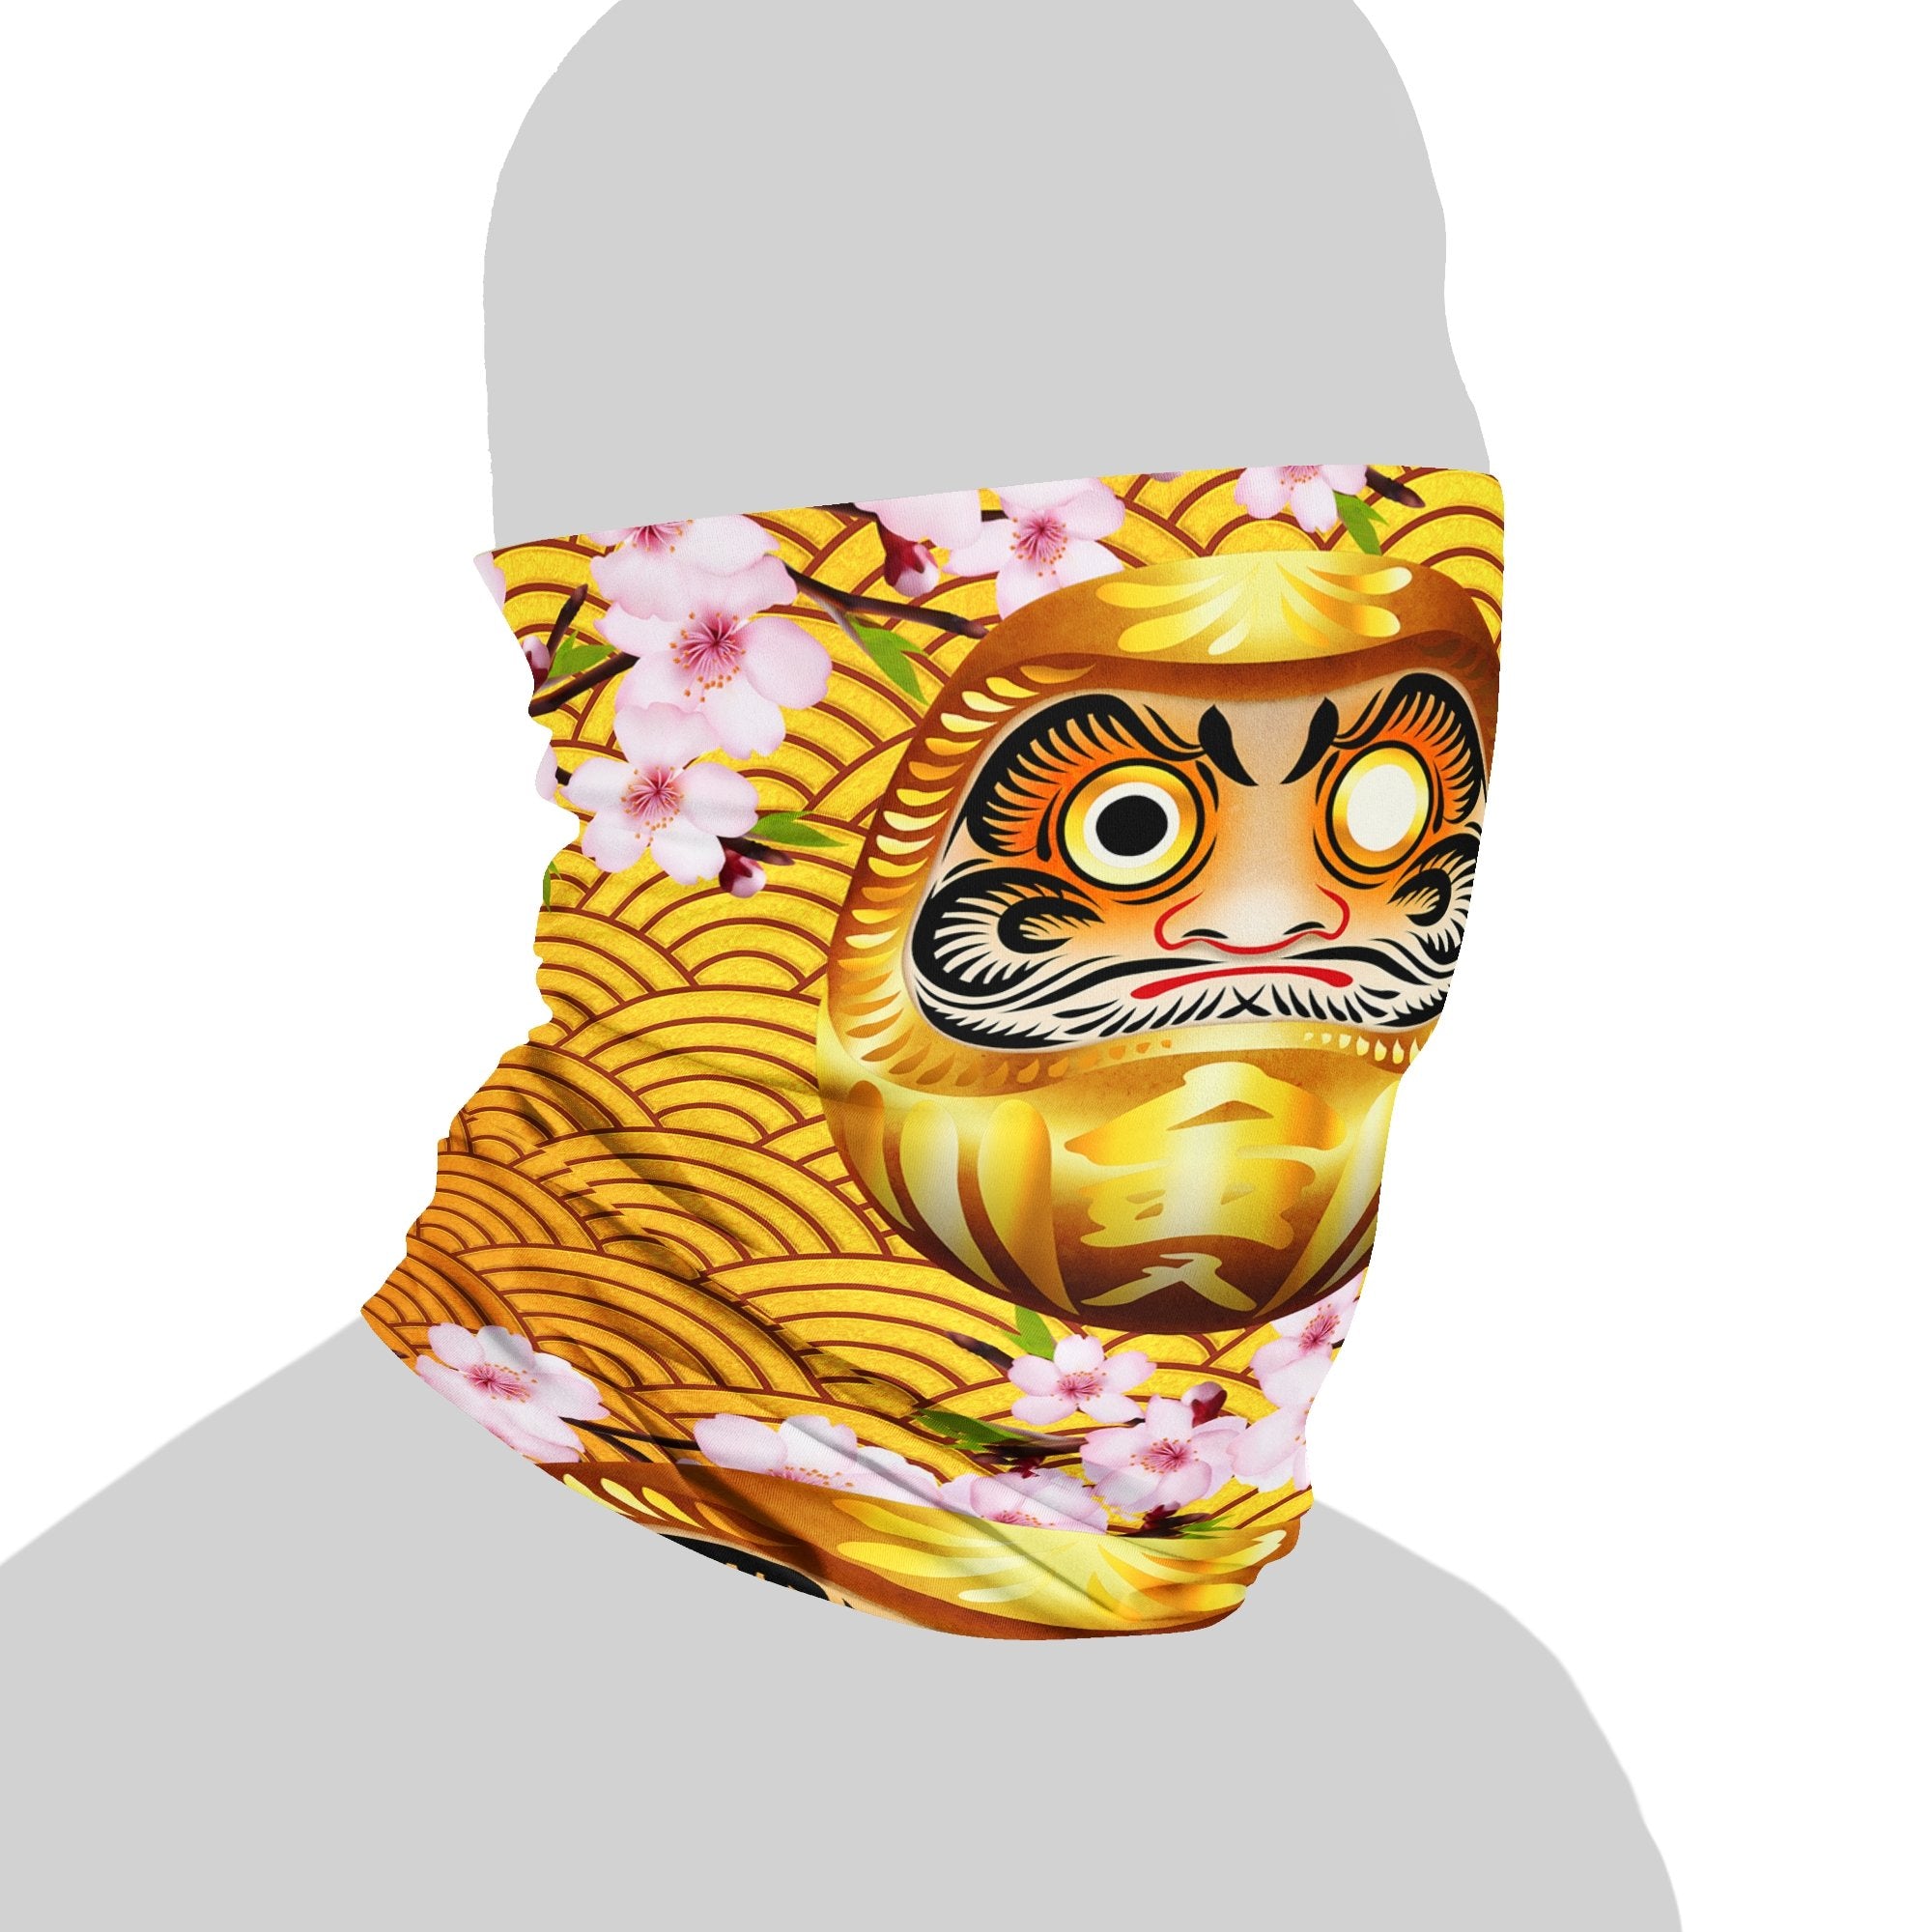 Japanese Neck Gaiter, Face Mask, Head Covering, Daruma, Funny Anime Style Outfit - Gold - Abysm Internal